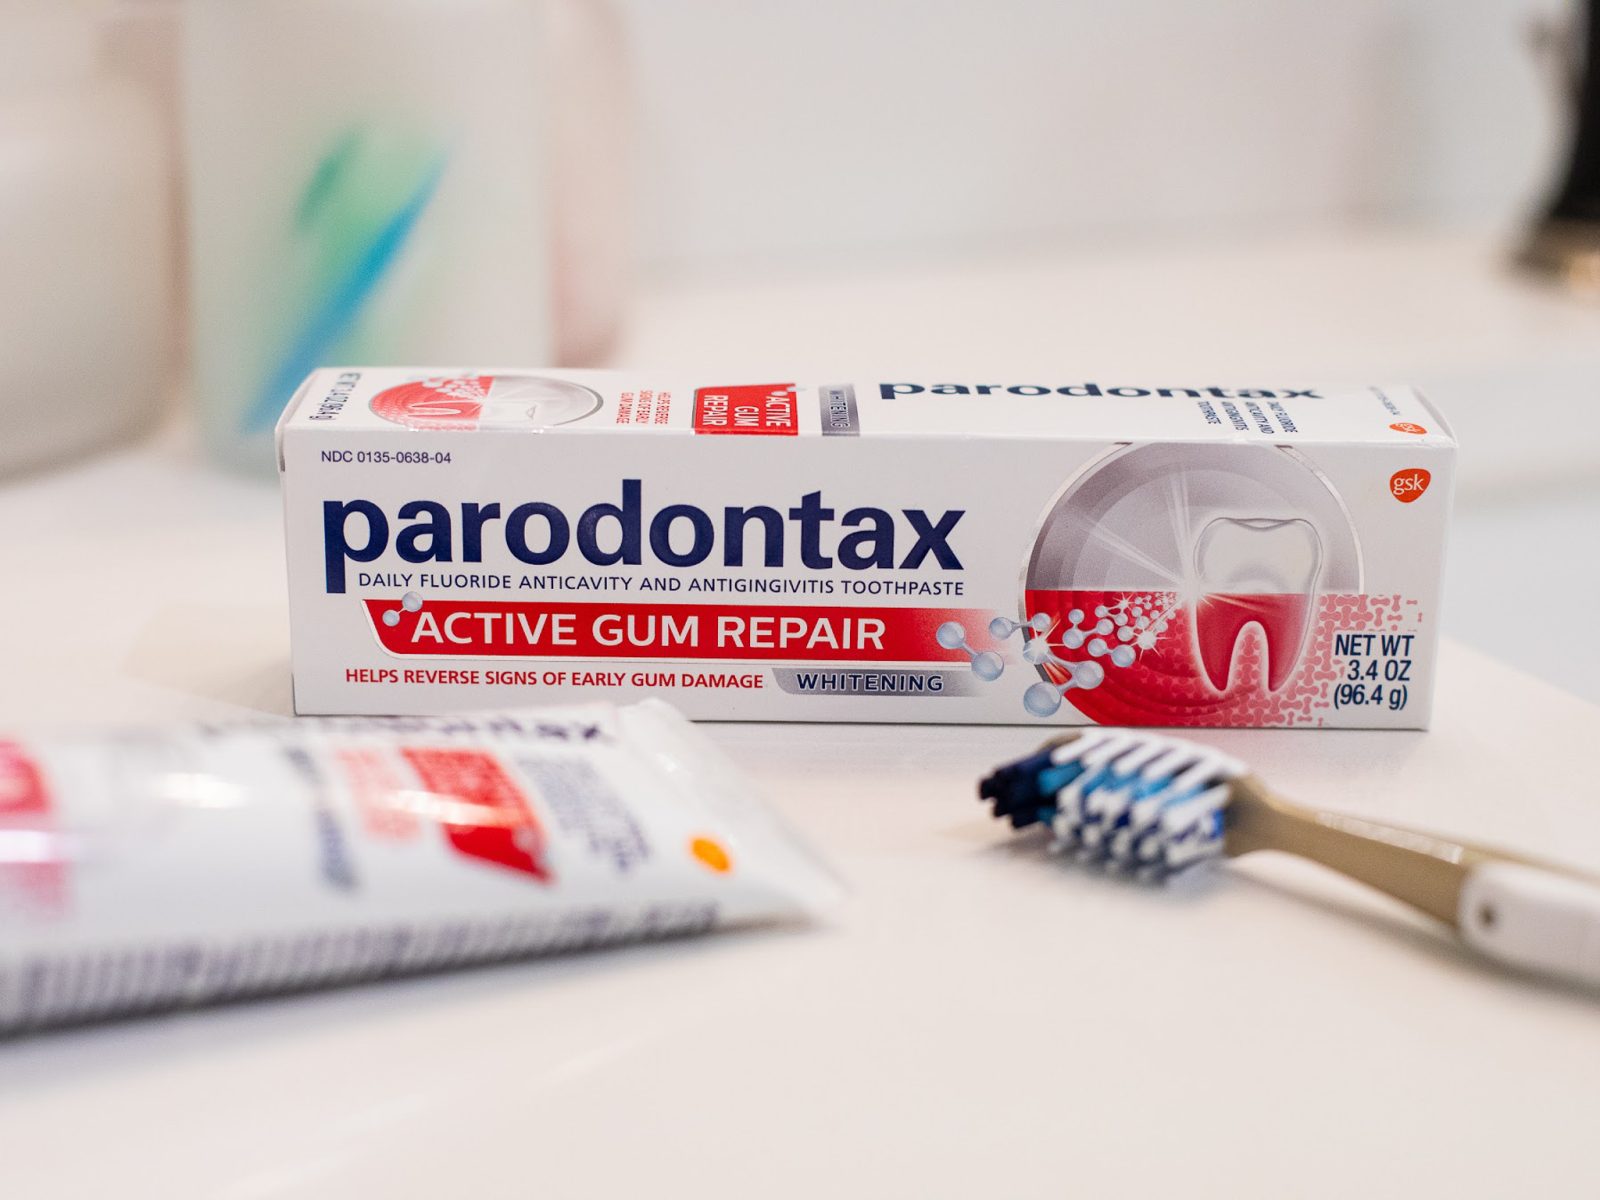 Get Parodontax Toothpaste For As Low As $3.74 At Publix